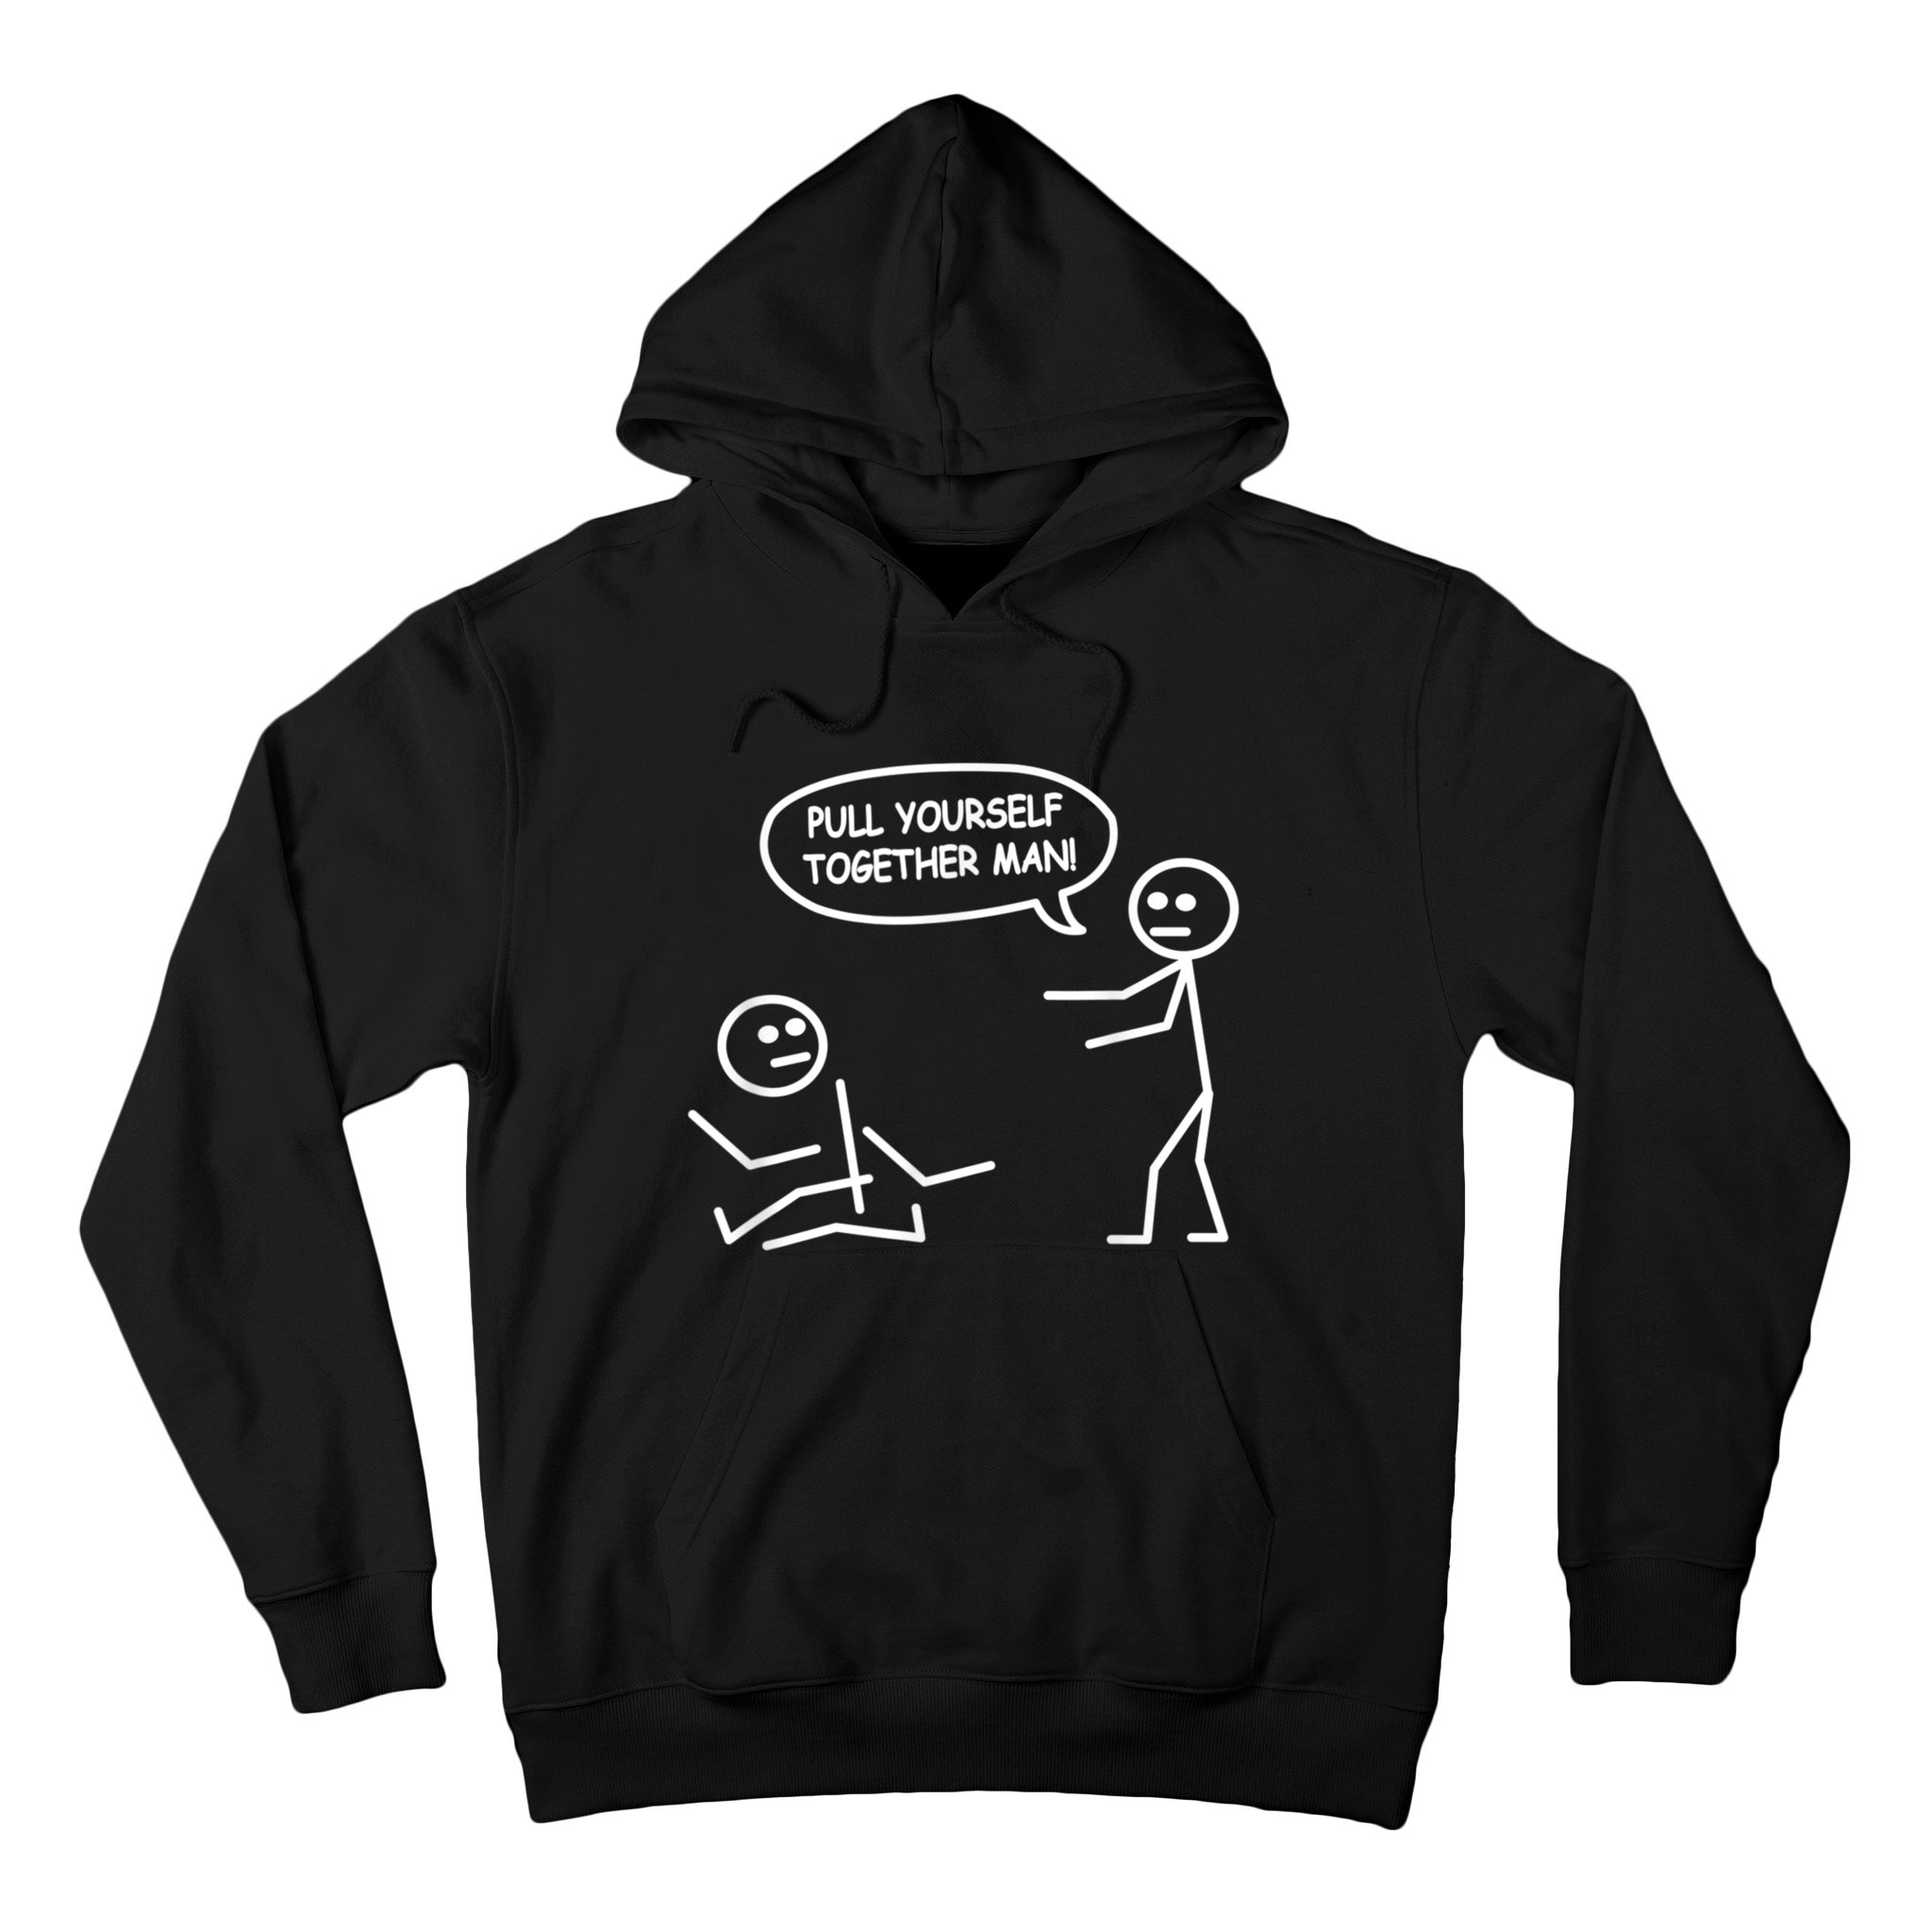 Fun With Stick Figures - Gallery  Stick figures, Man humor, Stick